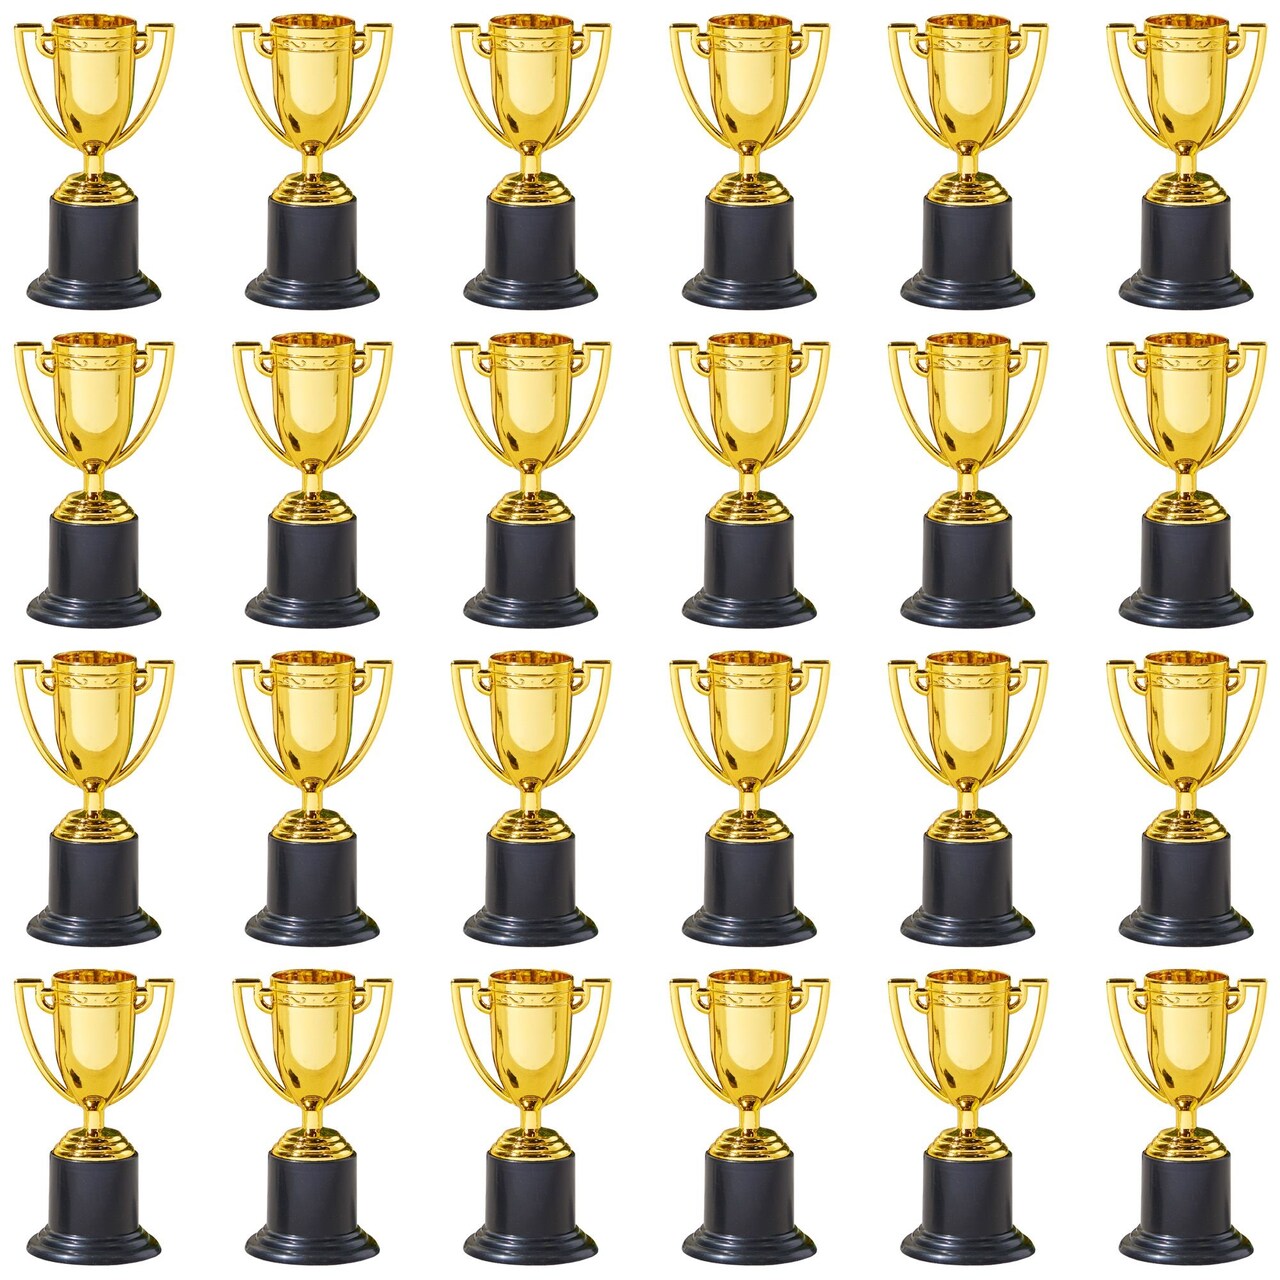 24 Pack Mini Trophies for All Ages Awards, Gold Participation Trophy Cup for Sports, Tournaments, Competitions (4 In)